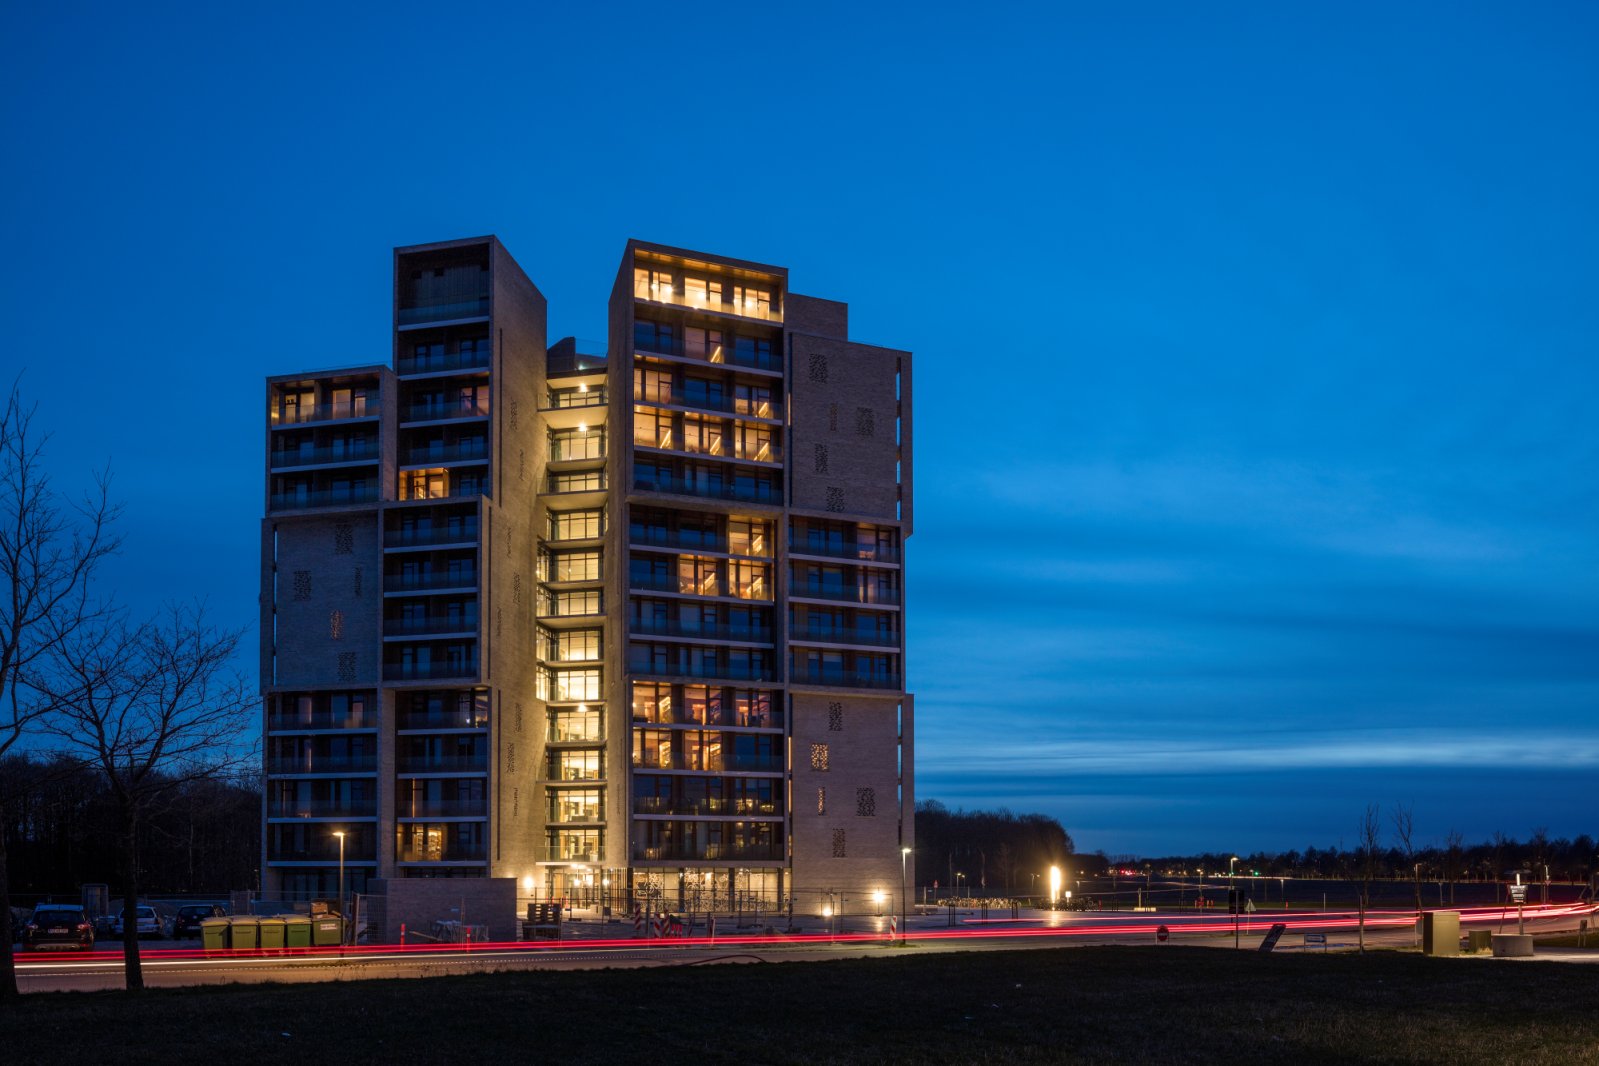 Student Housing for the University of Southern Denmark